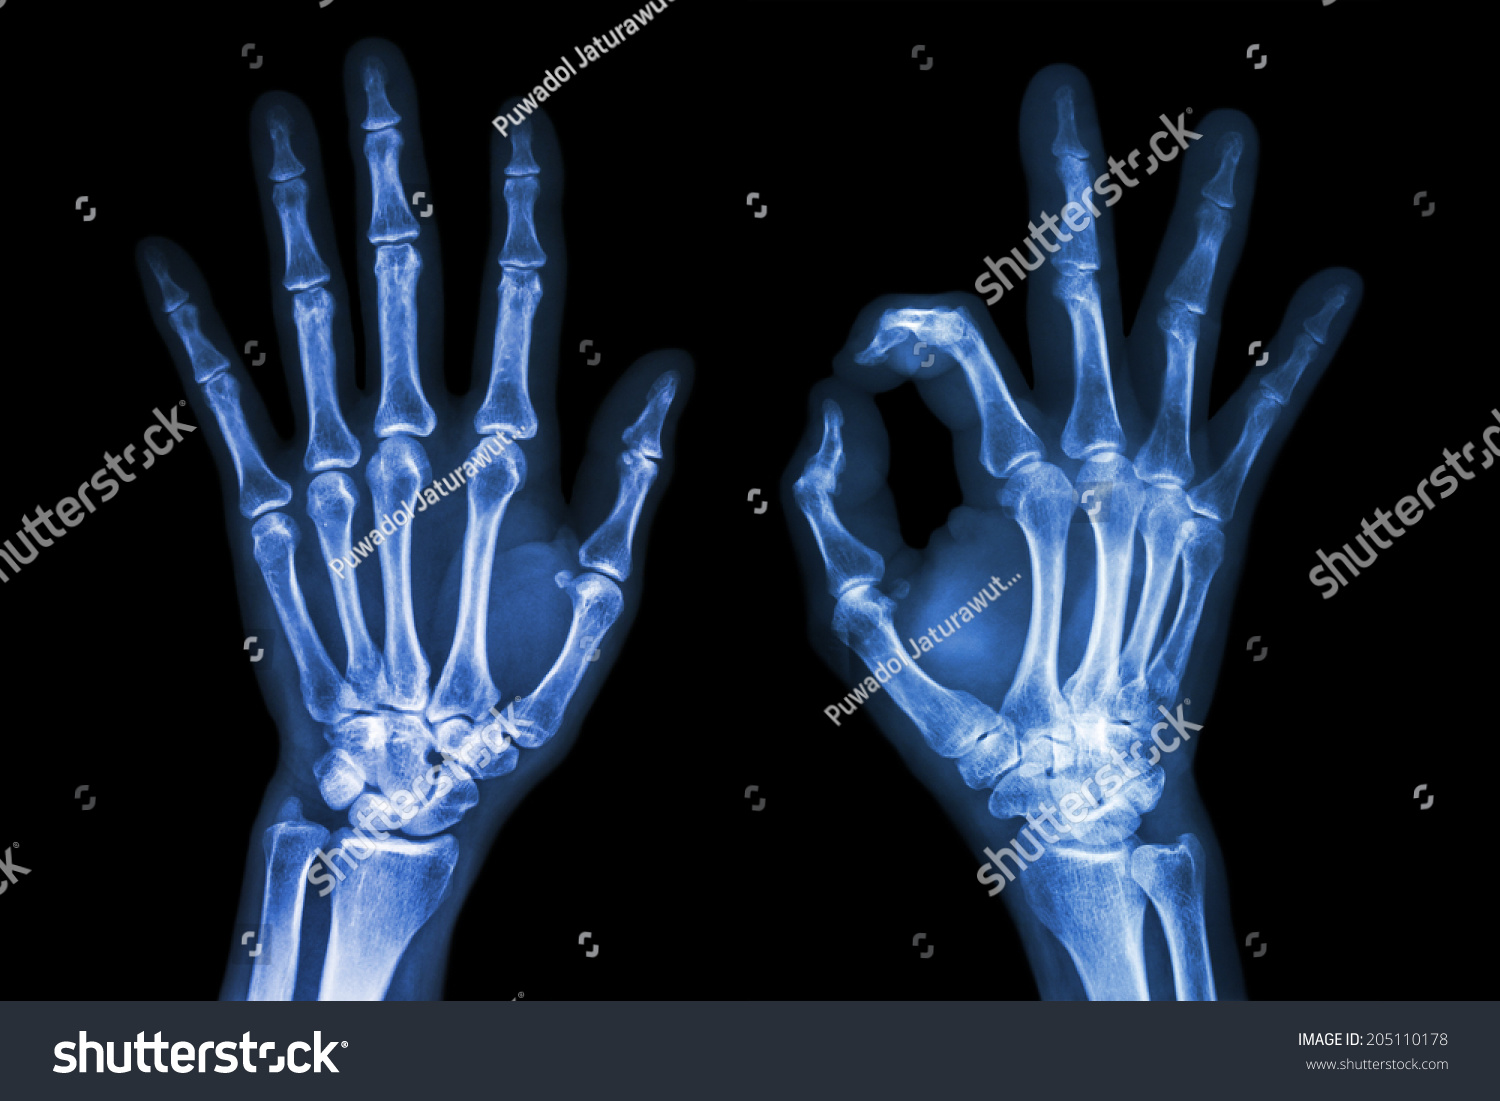 Edit Pictures Free Online - X-ray both | Shutterstock Editor